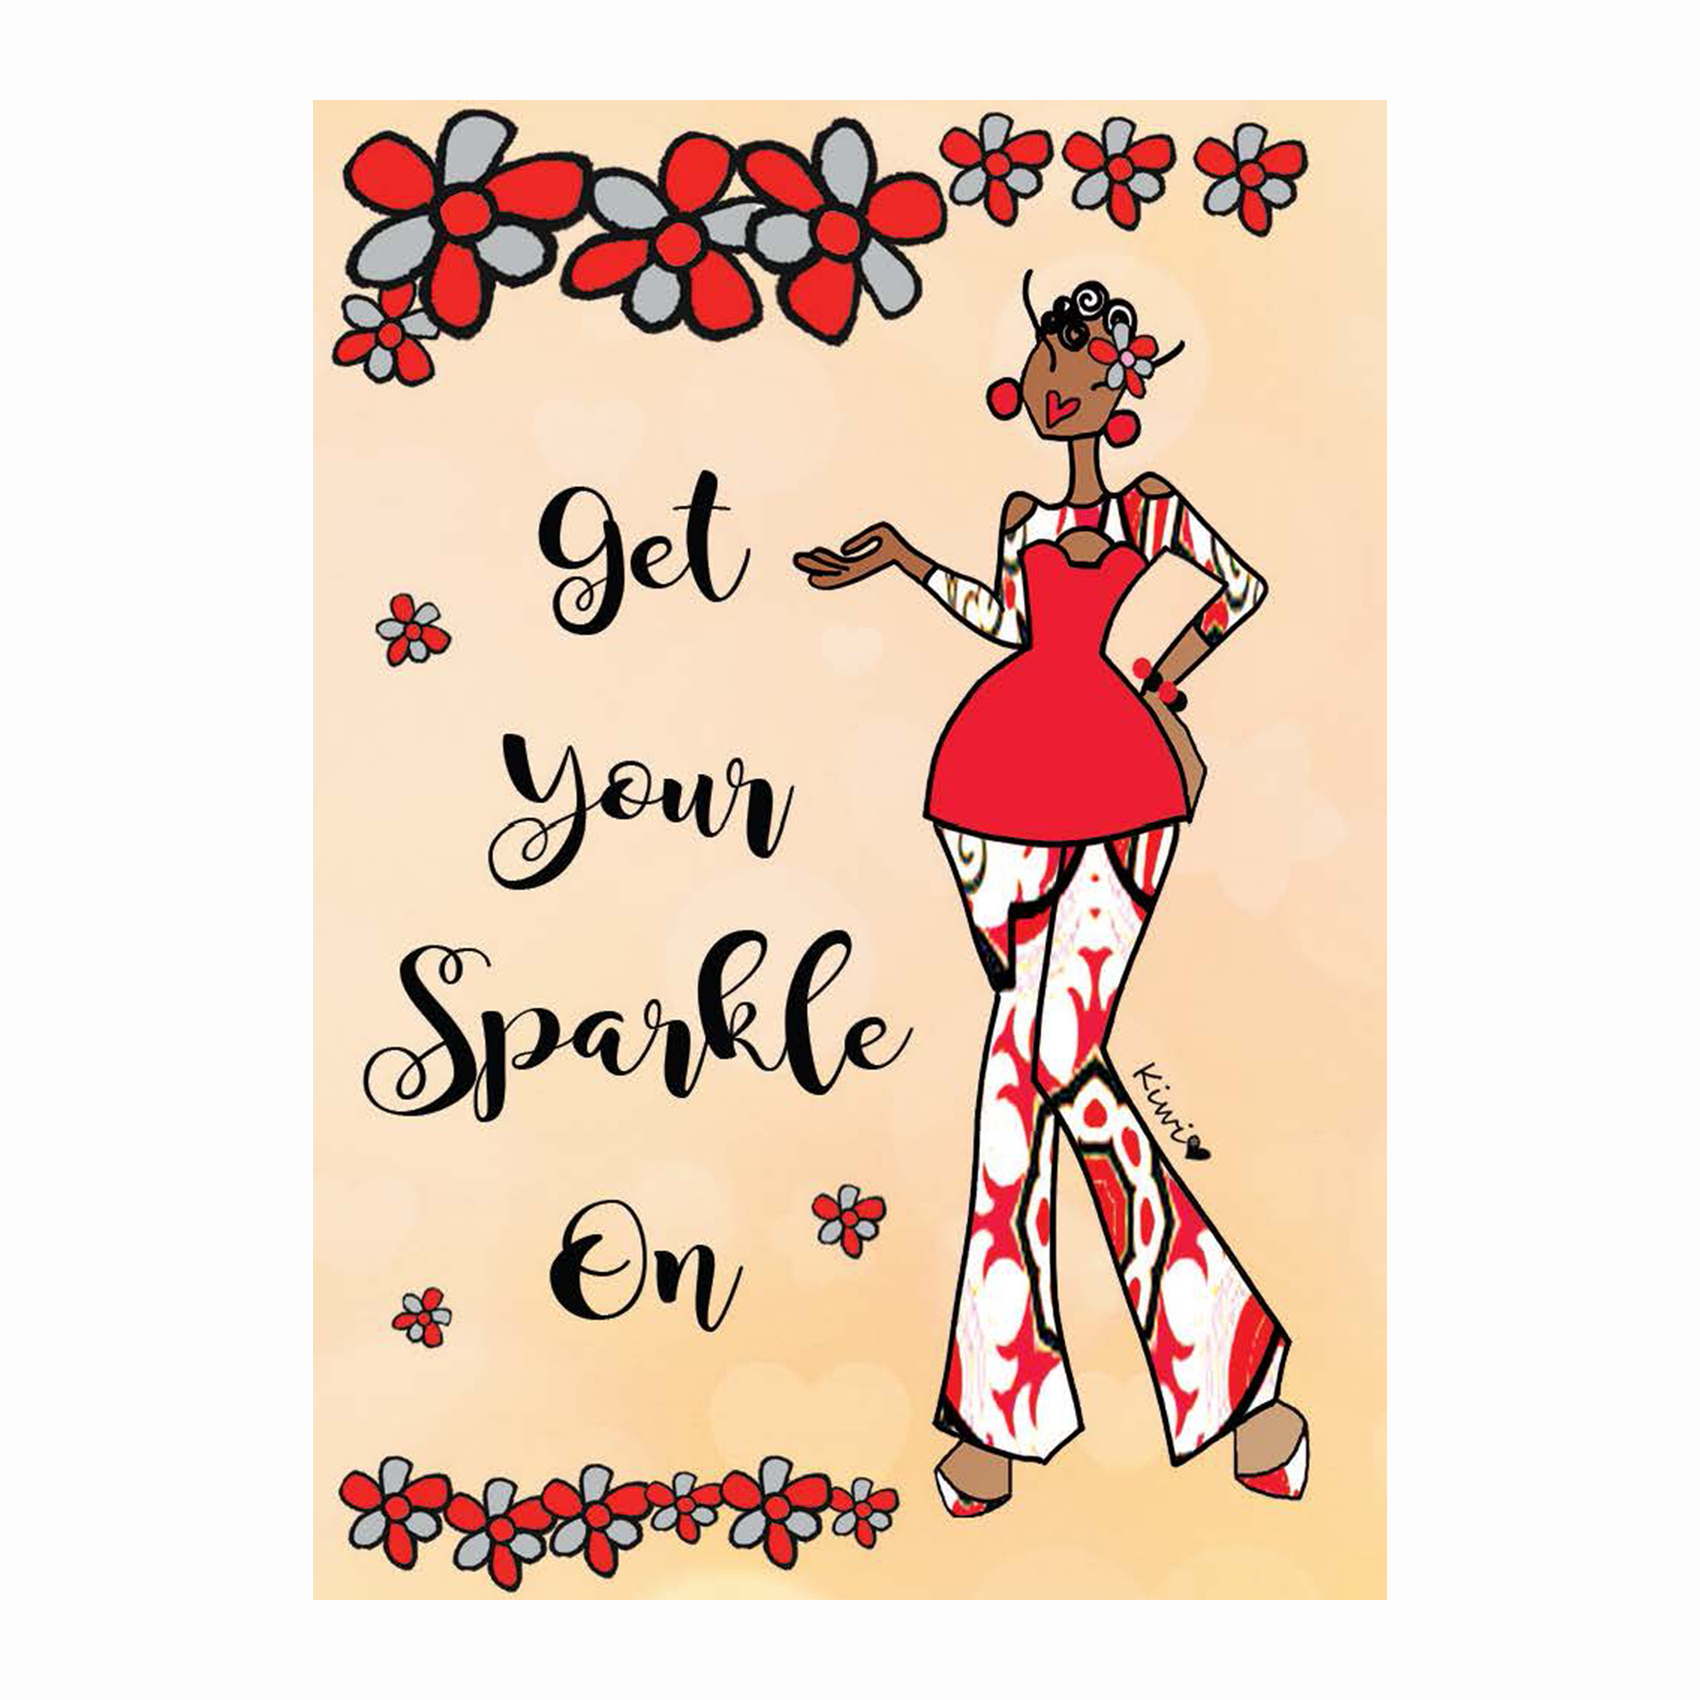 1 of 2: Get Your Sparkle On: African American Magnet by Kiwi McDowell